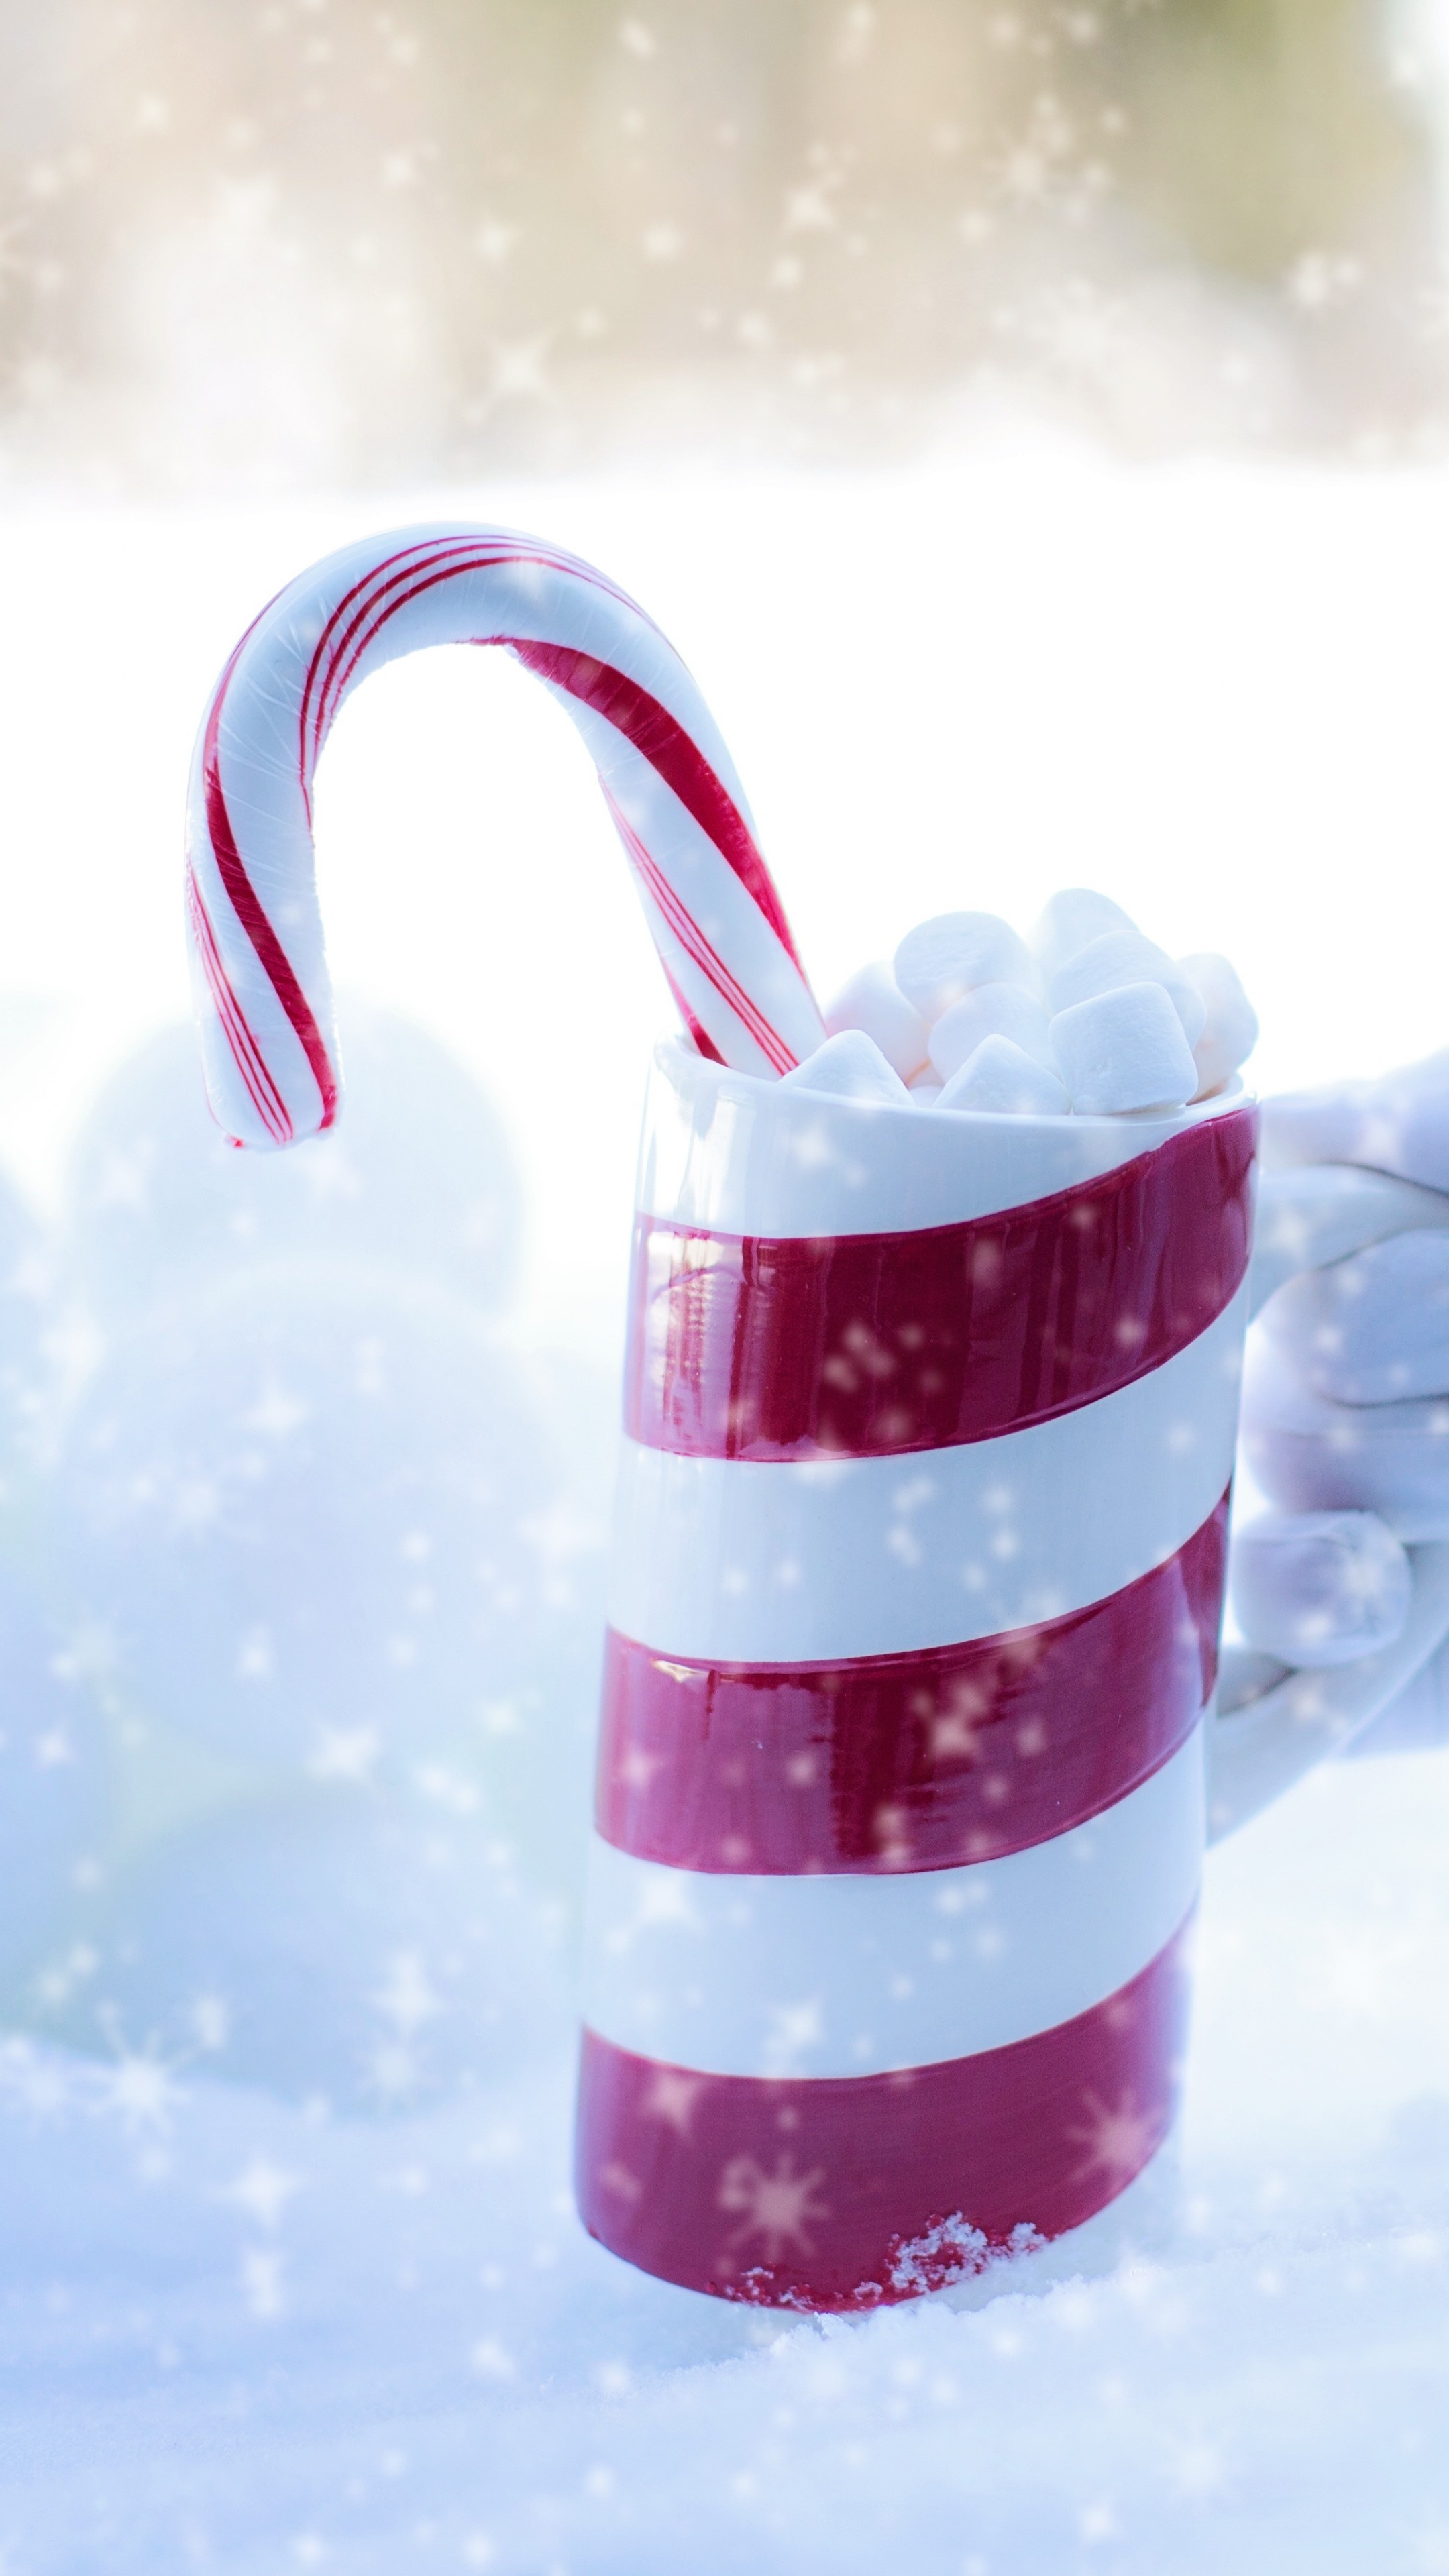 Santa's candy cup, Snowy winter delight, Christmas sweetness, Festive decoration, 2160x3840 4K Phone